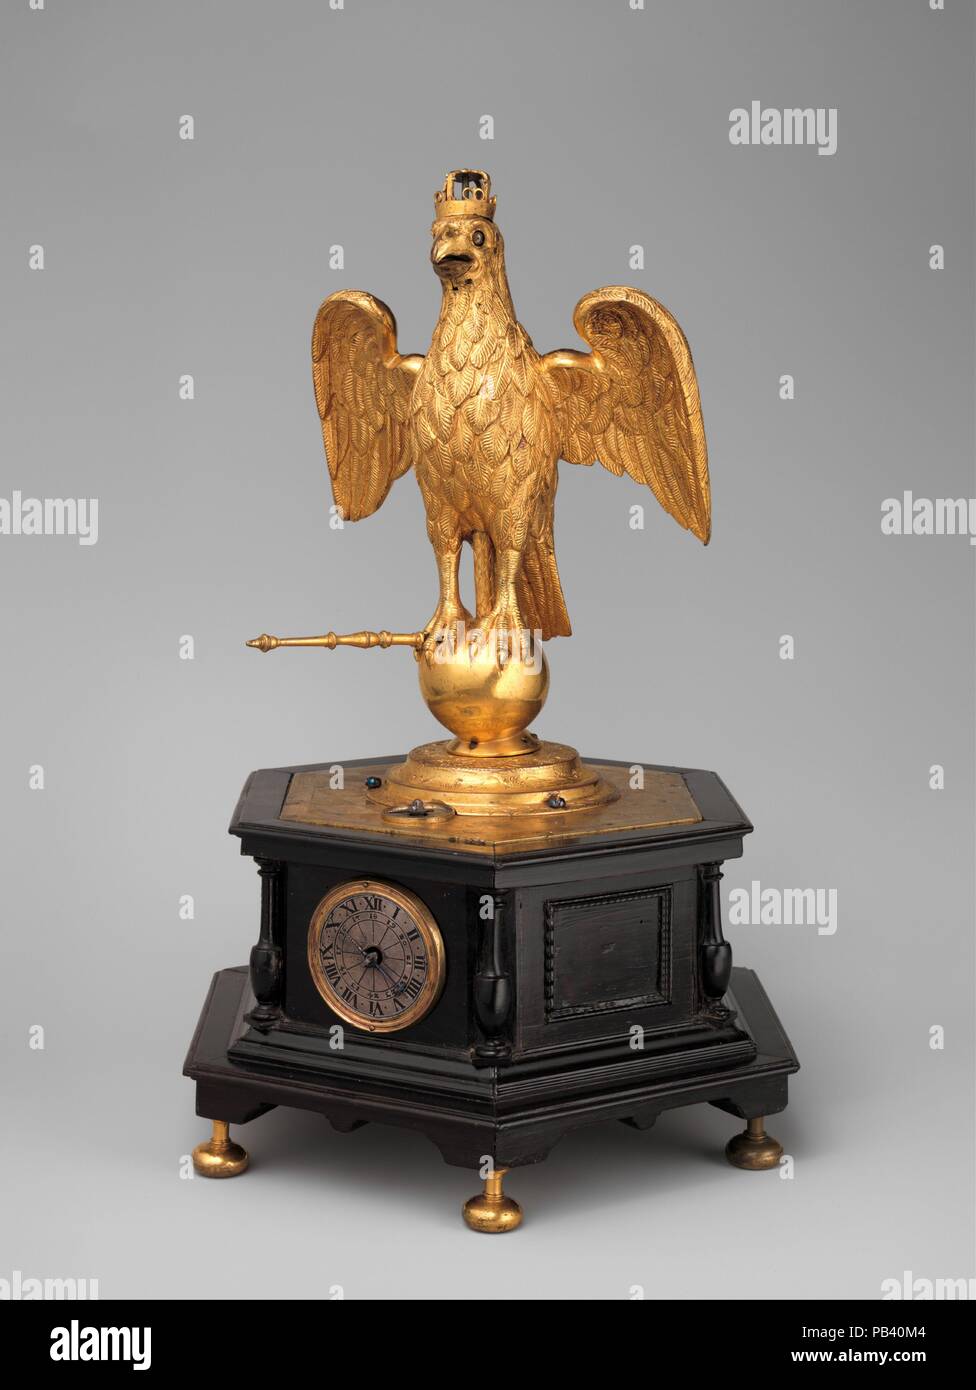 Automaton clock in the form of an eagle. Culture: German, Augsburg. Dimensions: Overall: 13 1/4 × 9 1/8 × 7 5/8 in. (33.7 × 23.2 × 19.4 cm). Date: ca. 1630.  European clocks were often, and from the outset, associated with the creation of automata--moving, mechanized figures or contrivances. Seventeenth-century Augsburg clockmakers specialized in small domestic examples. Here, when the clock strikes the hour, the scepter moves, and on the quarter hours the eagle opens and shuts its beak and rolls its eyes. The eagle emblem of the Habsburgs had special meaning for inhabitants of Augsburg, a fre Stock Photo